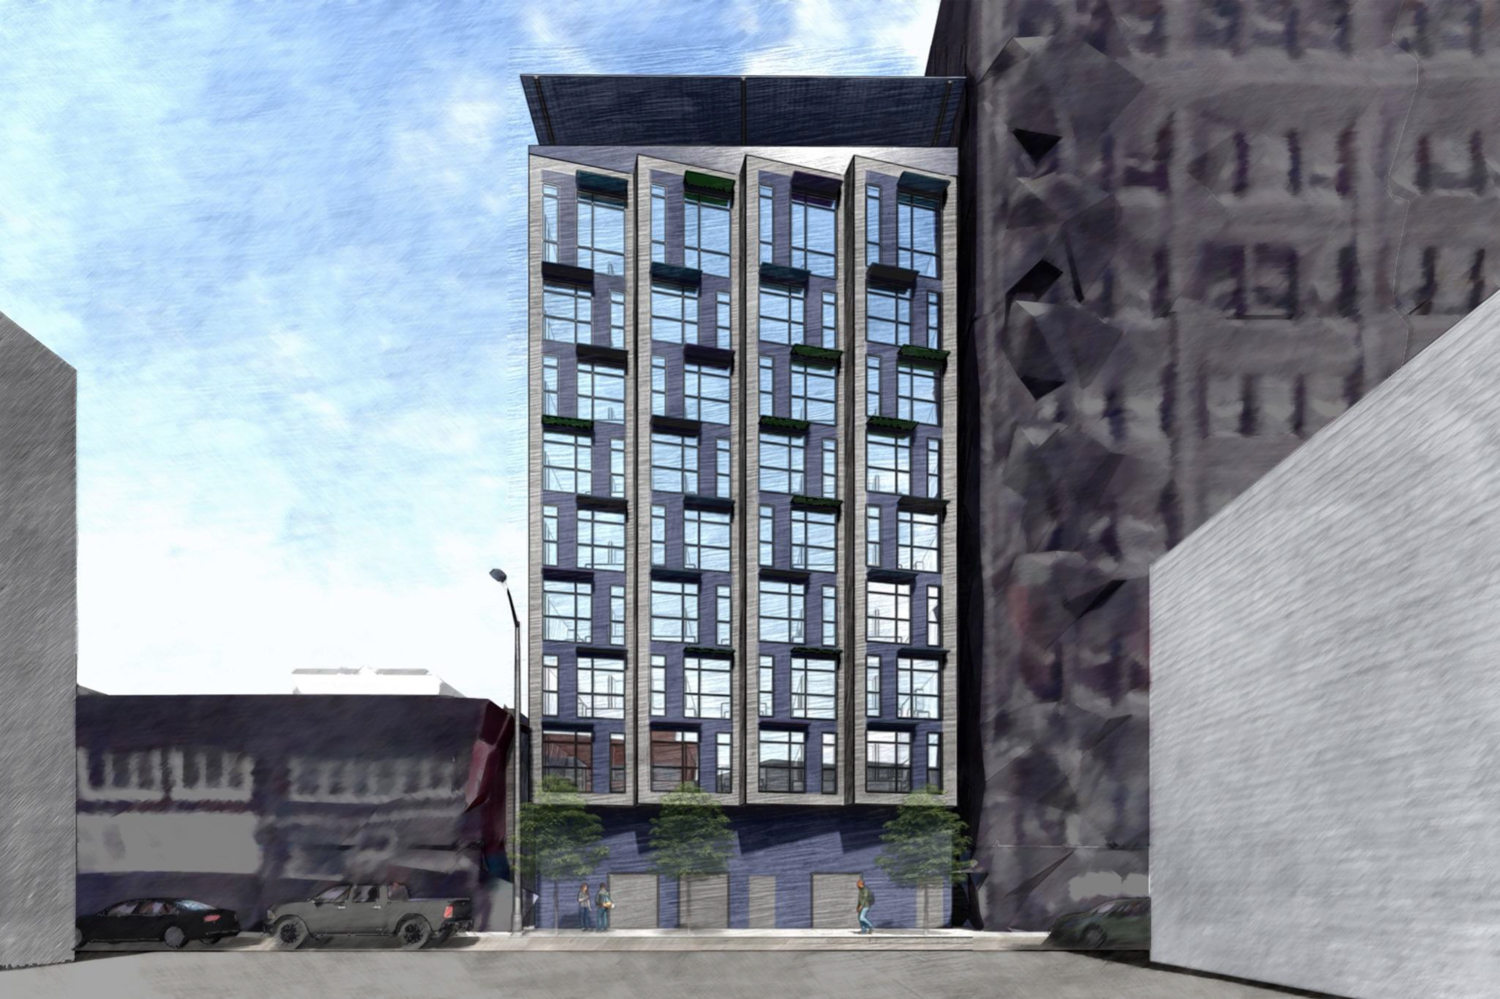 967 Mission Street elevation view along Minna Street, rendering by Leddy Maytum Stacy Architects and Y.A. Studio